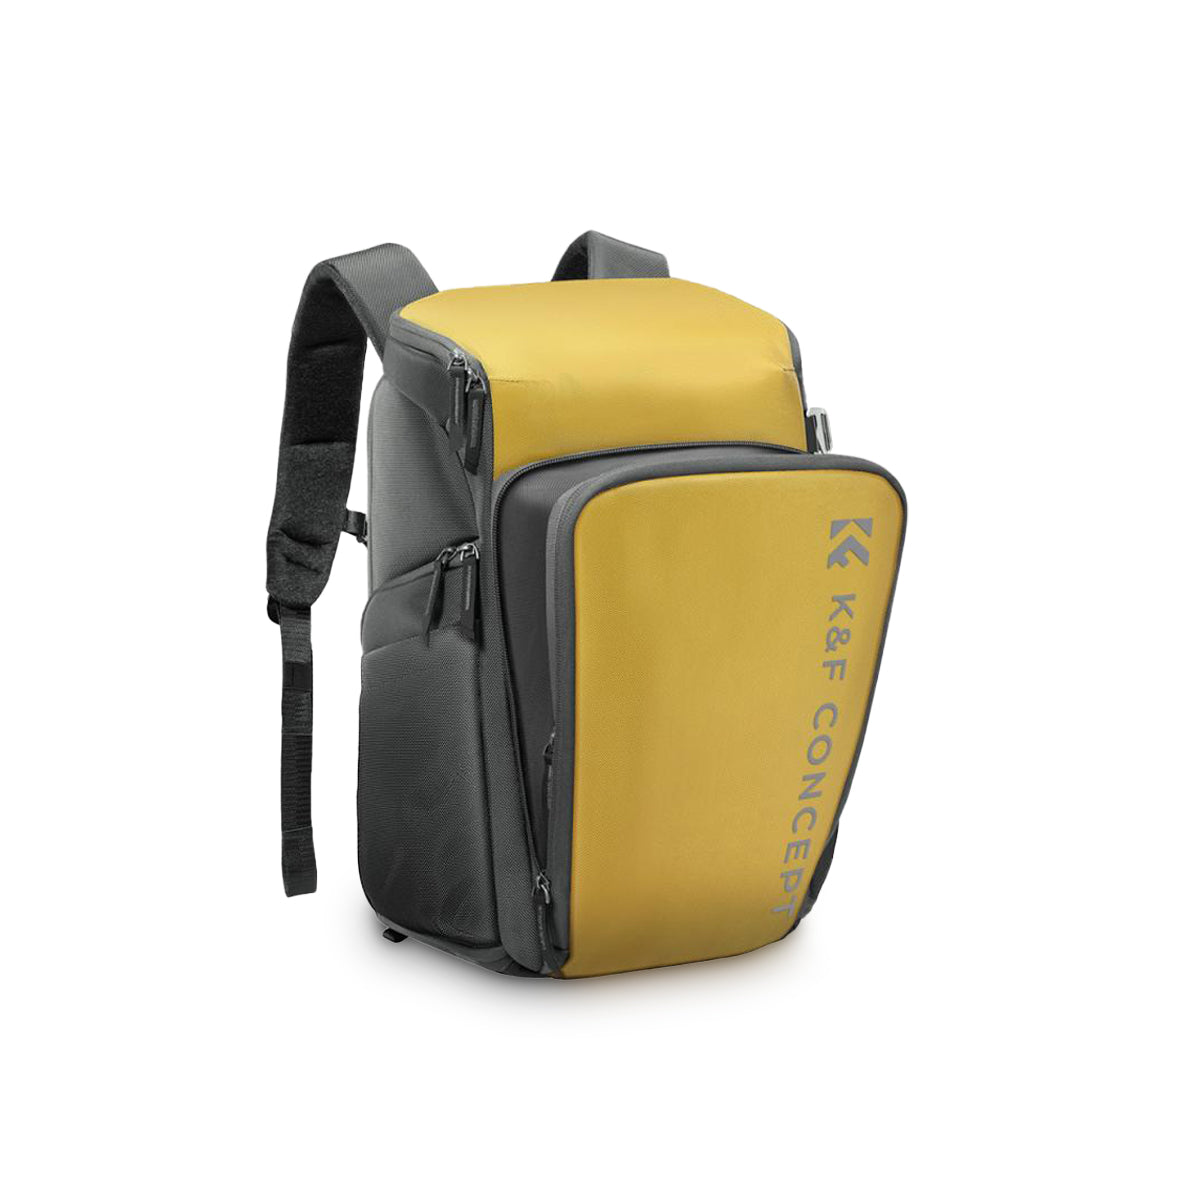 K&F Concept Camera Alpha Backpack Air 25L  with 16" Computer Compartment, Top & Side Access, Internal Support Fibers Bars and Raincover for Videography & Photography (Yellow, Grey, Black) | KF13-128 KF13-128V3 KF13-128V4